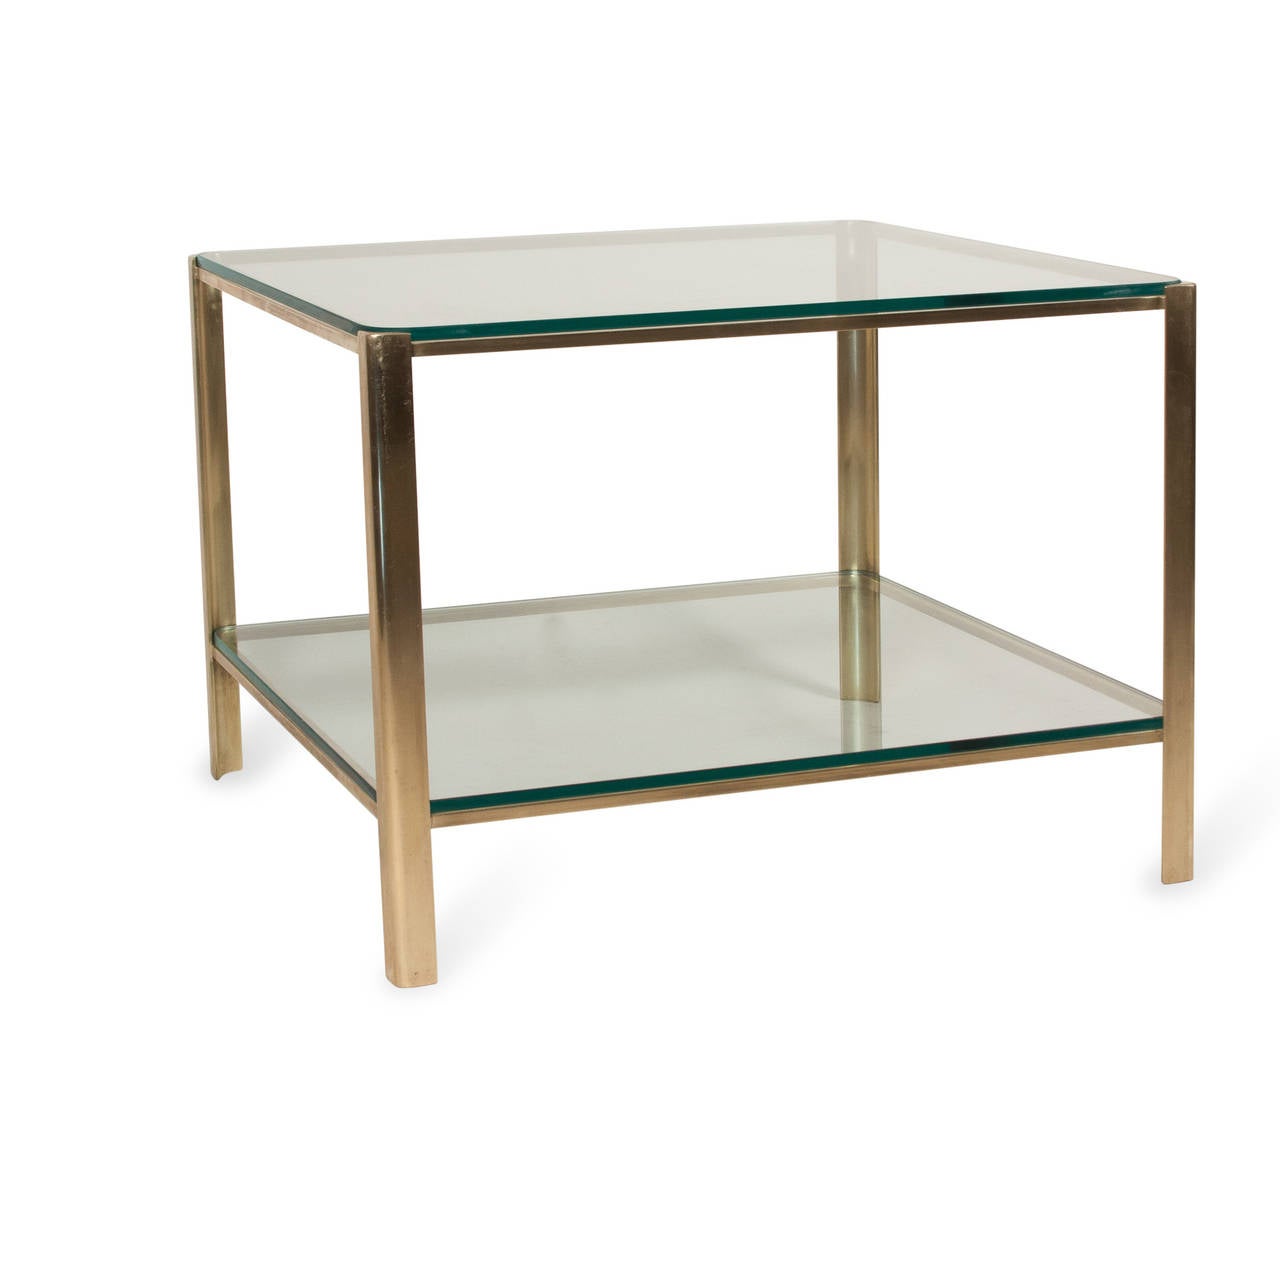 Mid-20th Century Square Two-Tier Coffee Table by Maison Malabert